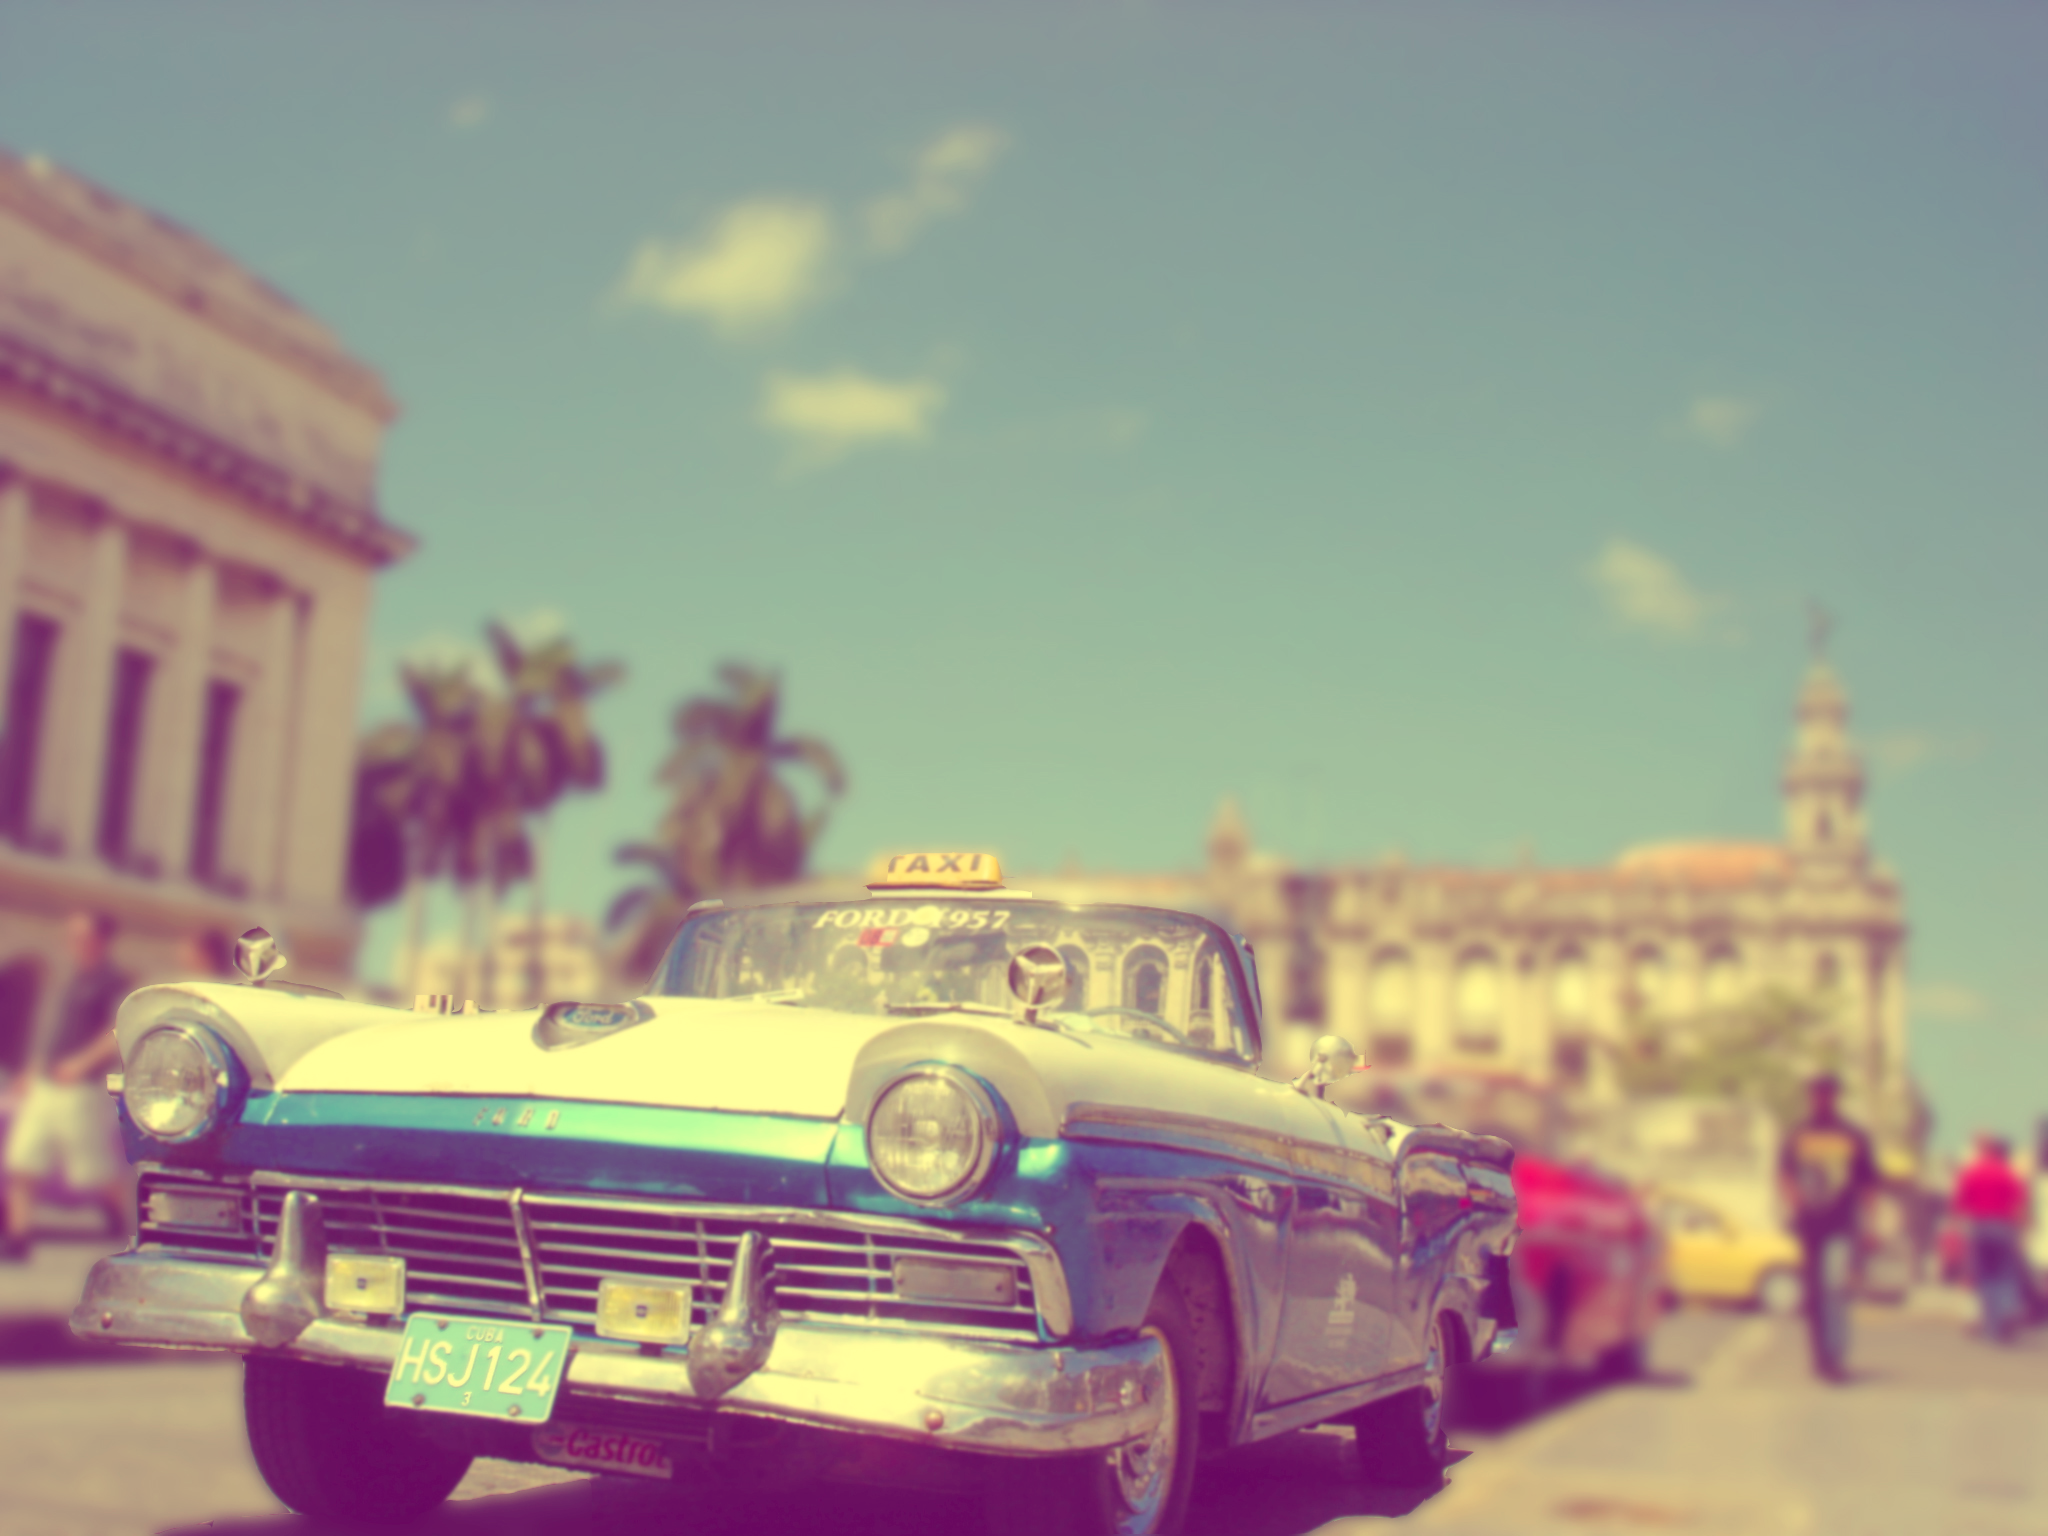 Cuba vintage taxi wallpapers hd desktop and mobile backgrounds